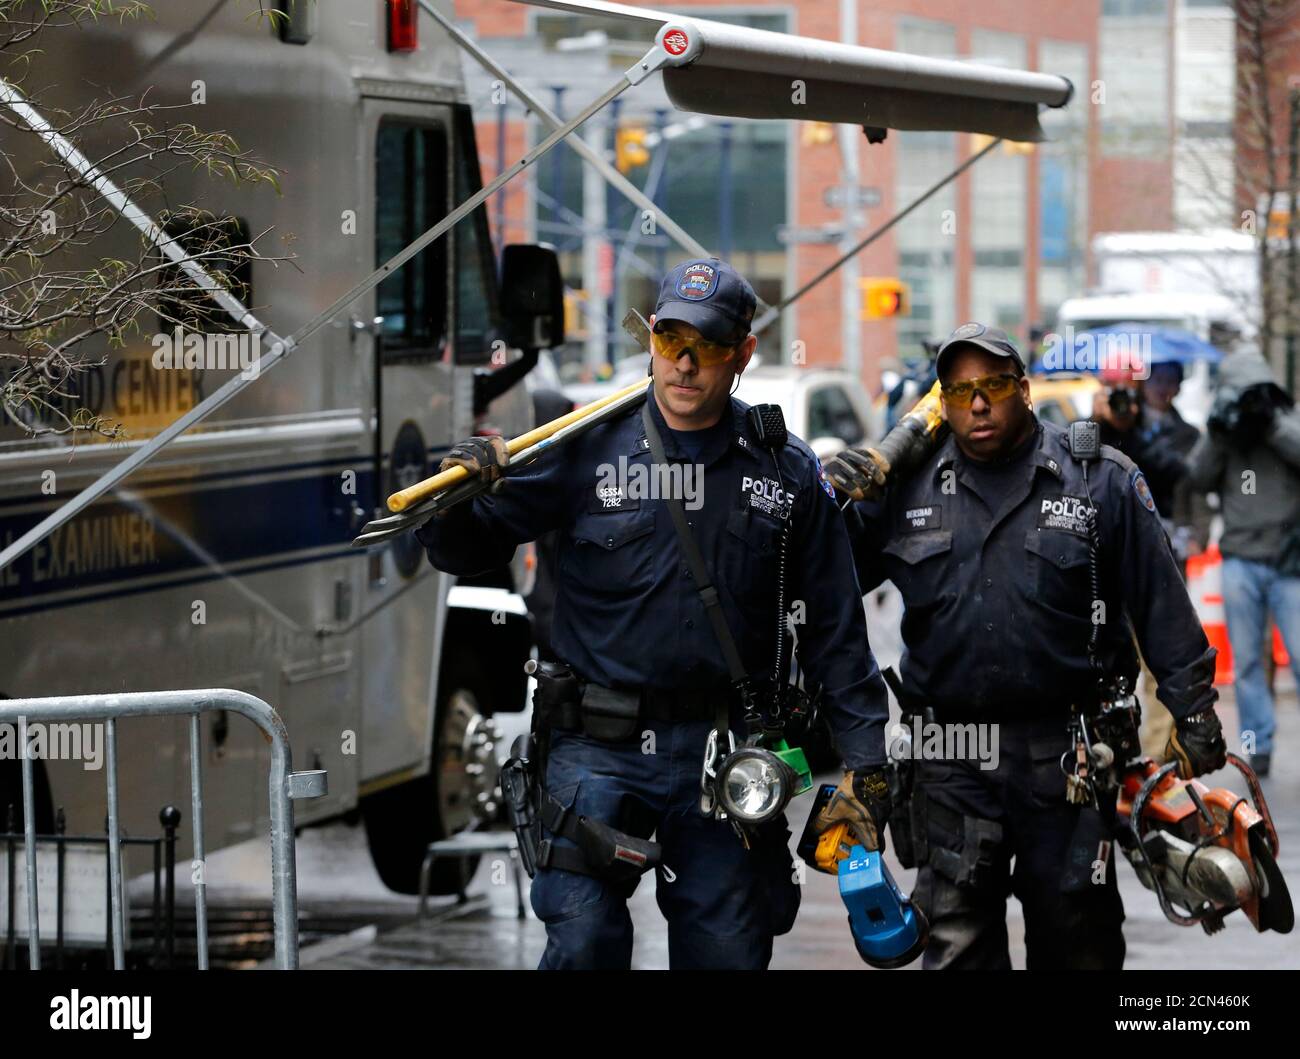 Members of the New York Police Department Emergency Service Unit exit 51 Park Place in New York, April 29, 2013. A Boeing representative confirmed to the New York Police Department that wreckage discovered last week, in a narrow alleyway behind 51 Park Place and 50 Murray Street in Manhattan's financial district, 'is believed to be from one of the two aircraft destroyed on September 11, 2001, but it could not be determined which one,' Paul Browne, NYPD's chief spokesman, said on Monday.  REUTERS/Brendan McDermid (UNITED STATES - Tags: TRANSPORT DISASTER CRIME LAW) Stock Photo